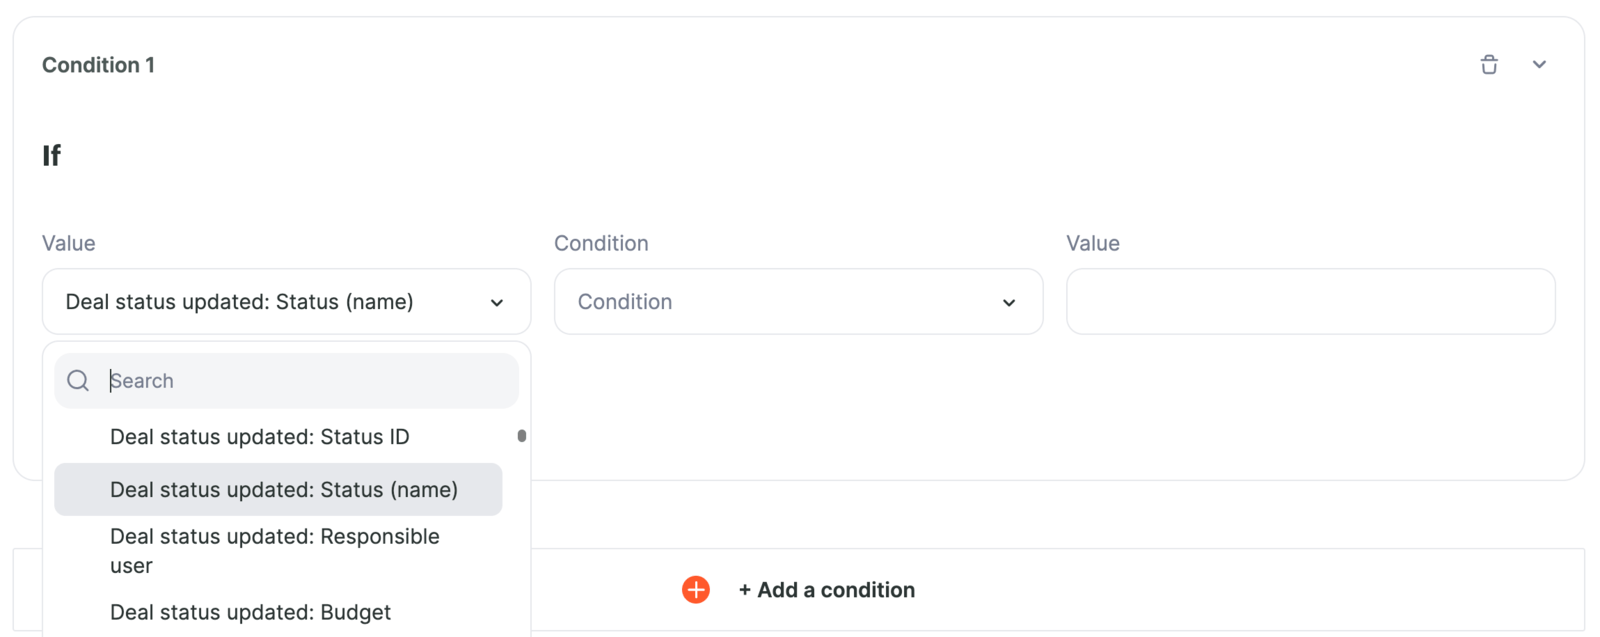 Setting up the condition. Select Status (name) in the first Value drop-down menu.